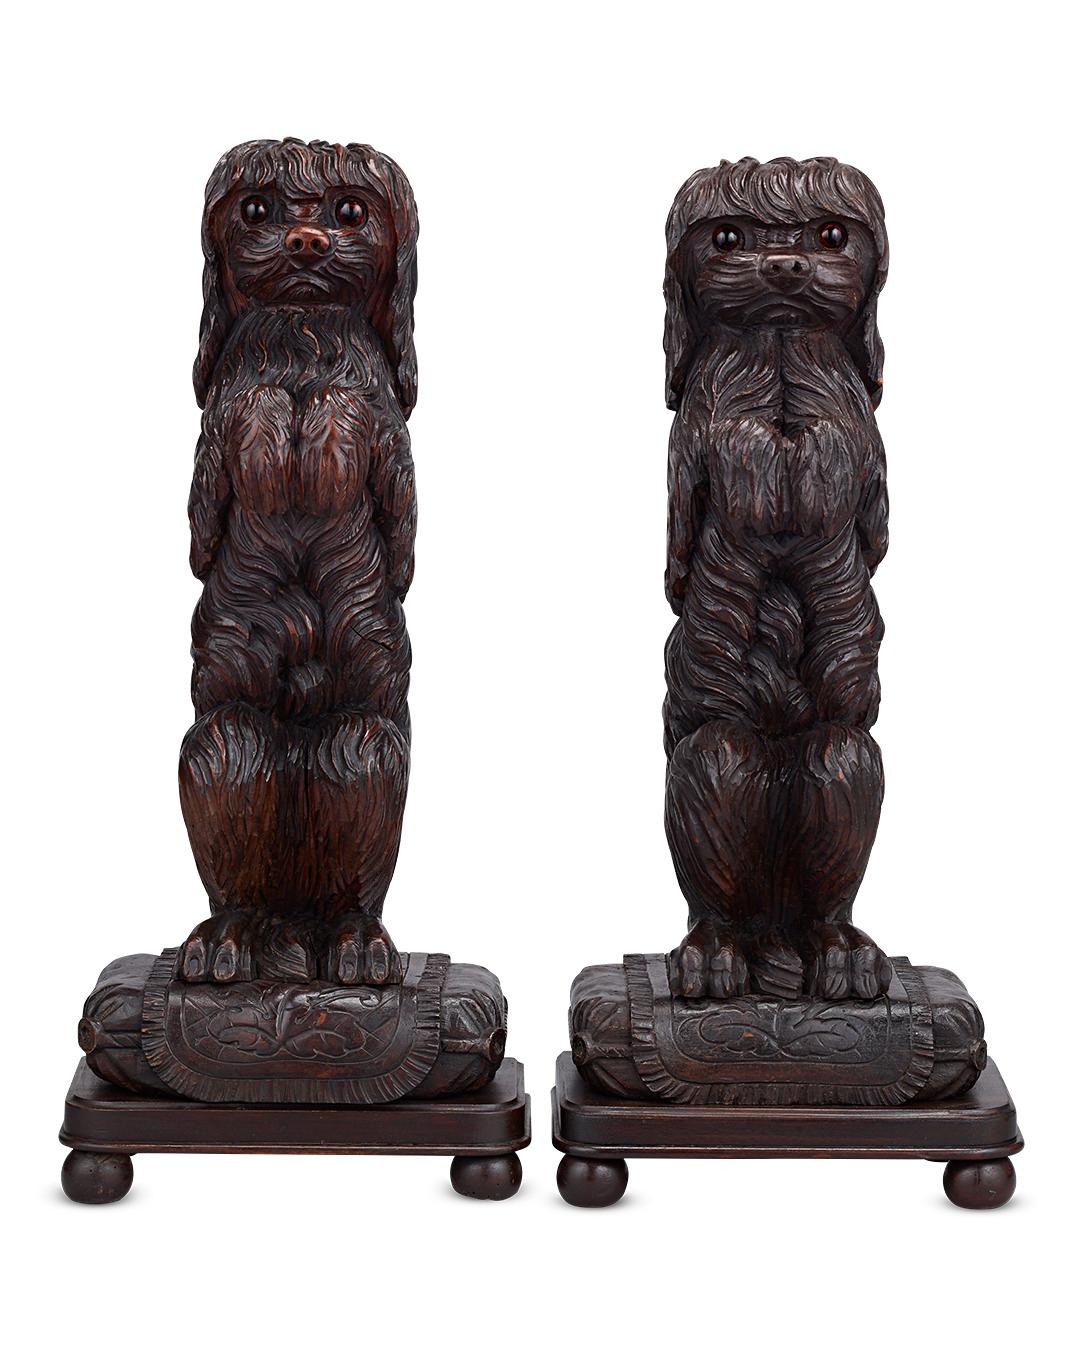 These remarkably detailed Black Forest carved door porters, each in the form of a begging spaniel standing on a cushion, cheerfully greet visitors. Exquisitely rendered, the delightful pooches display the outstanding artistry and creativity of the